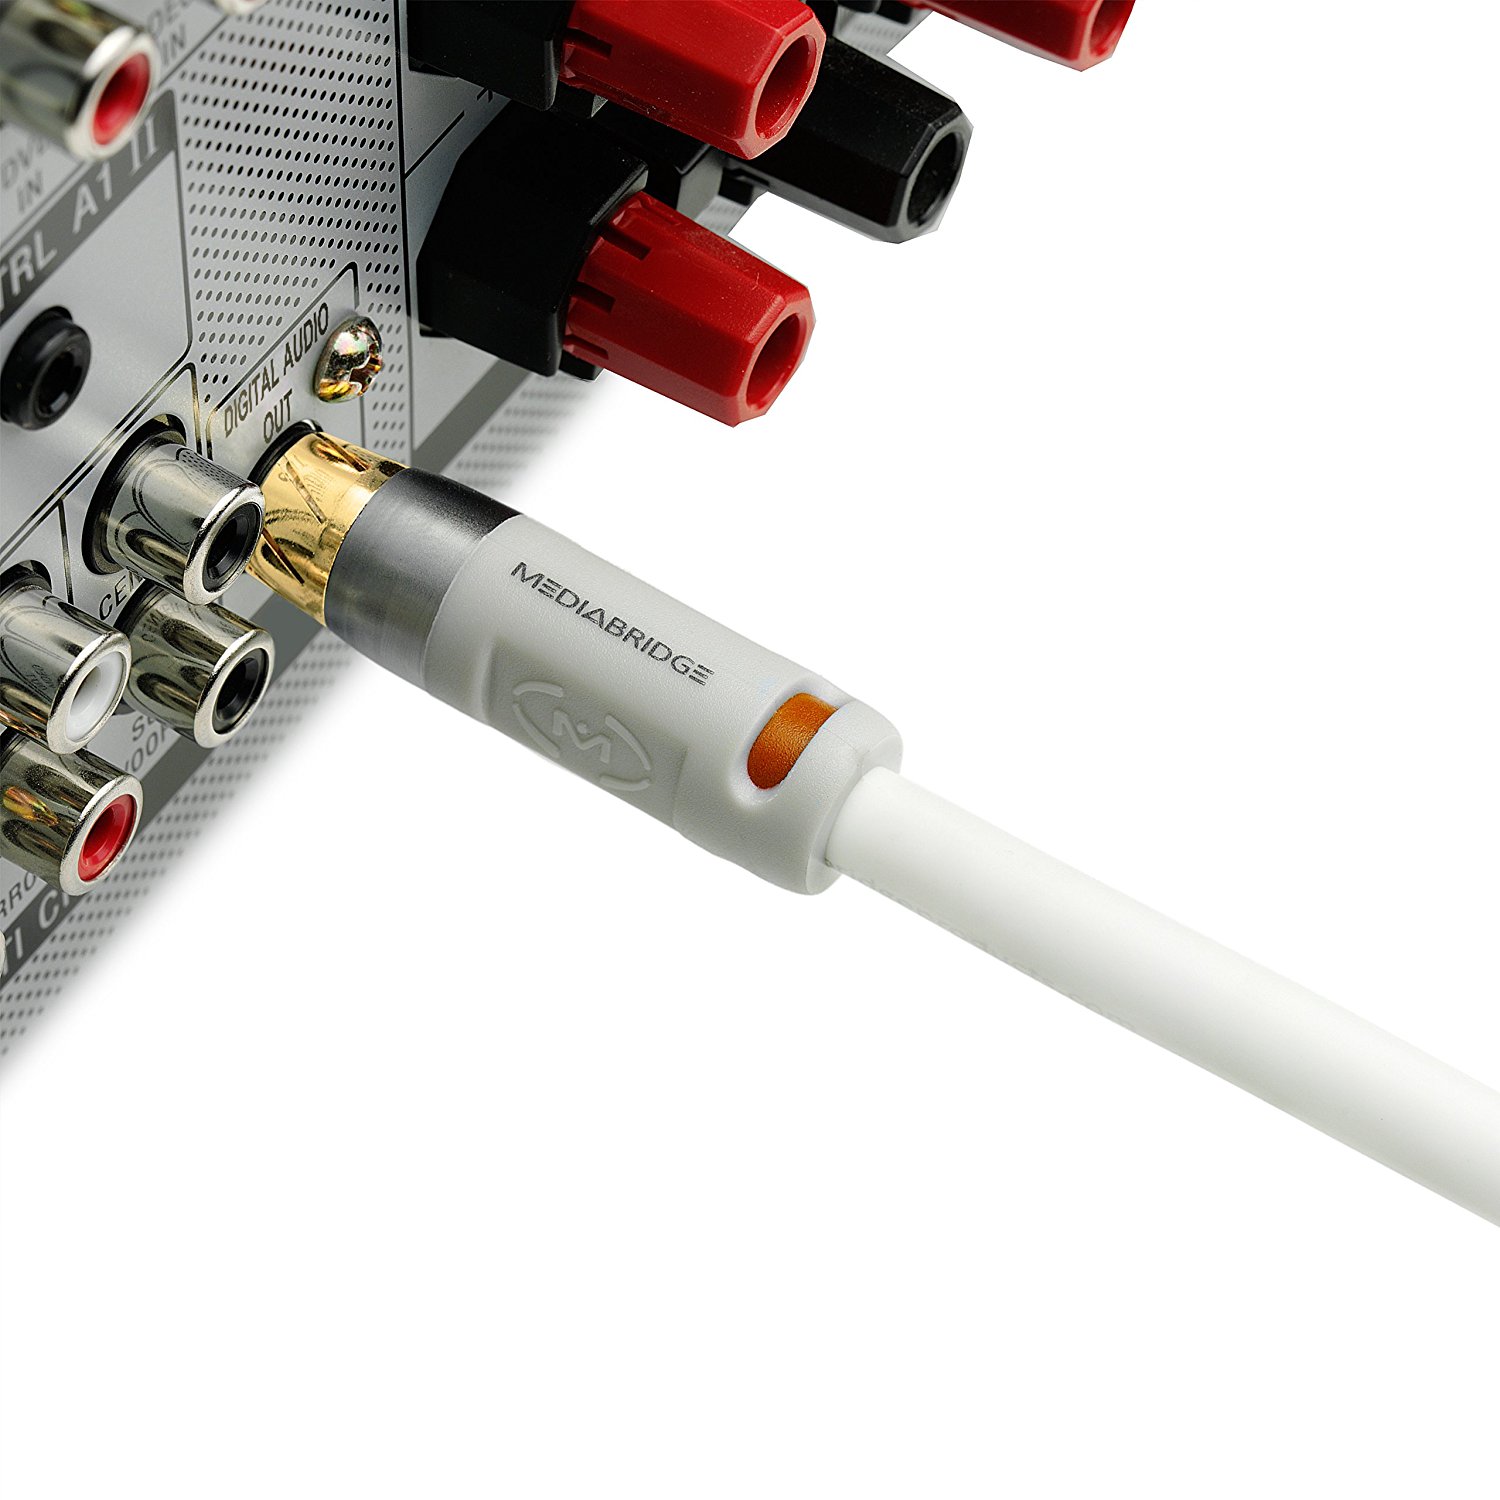 Mediabridge ULTRA Series Digital Audio Coaxial Cable (4 Feet) - Dual Shielded with RCA to RCA Gold-Plated Connectors - White - (Part# CJ04-6WR-G2 ) - image 4 of 4